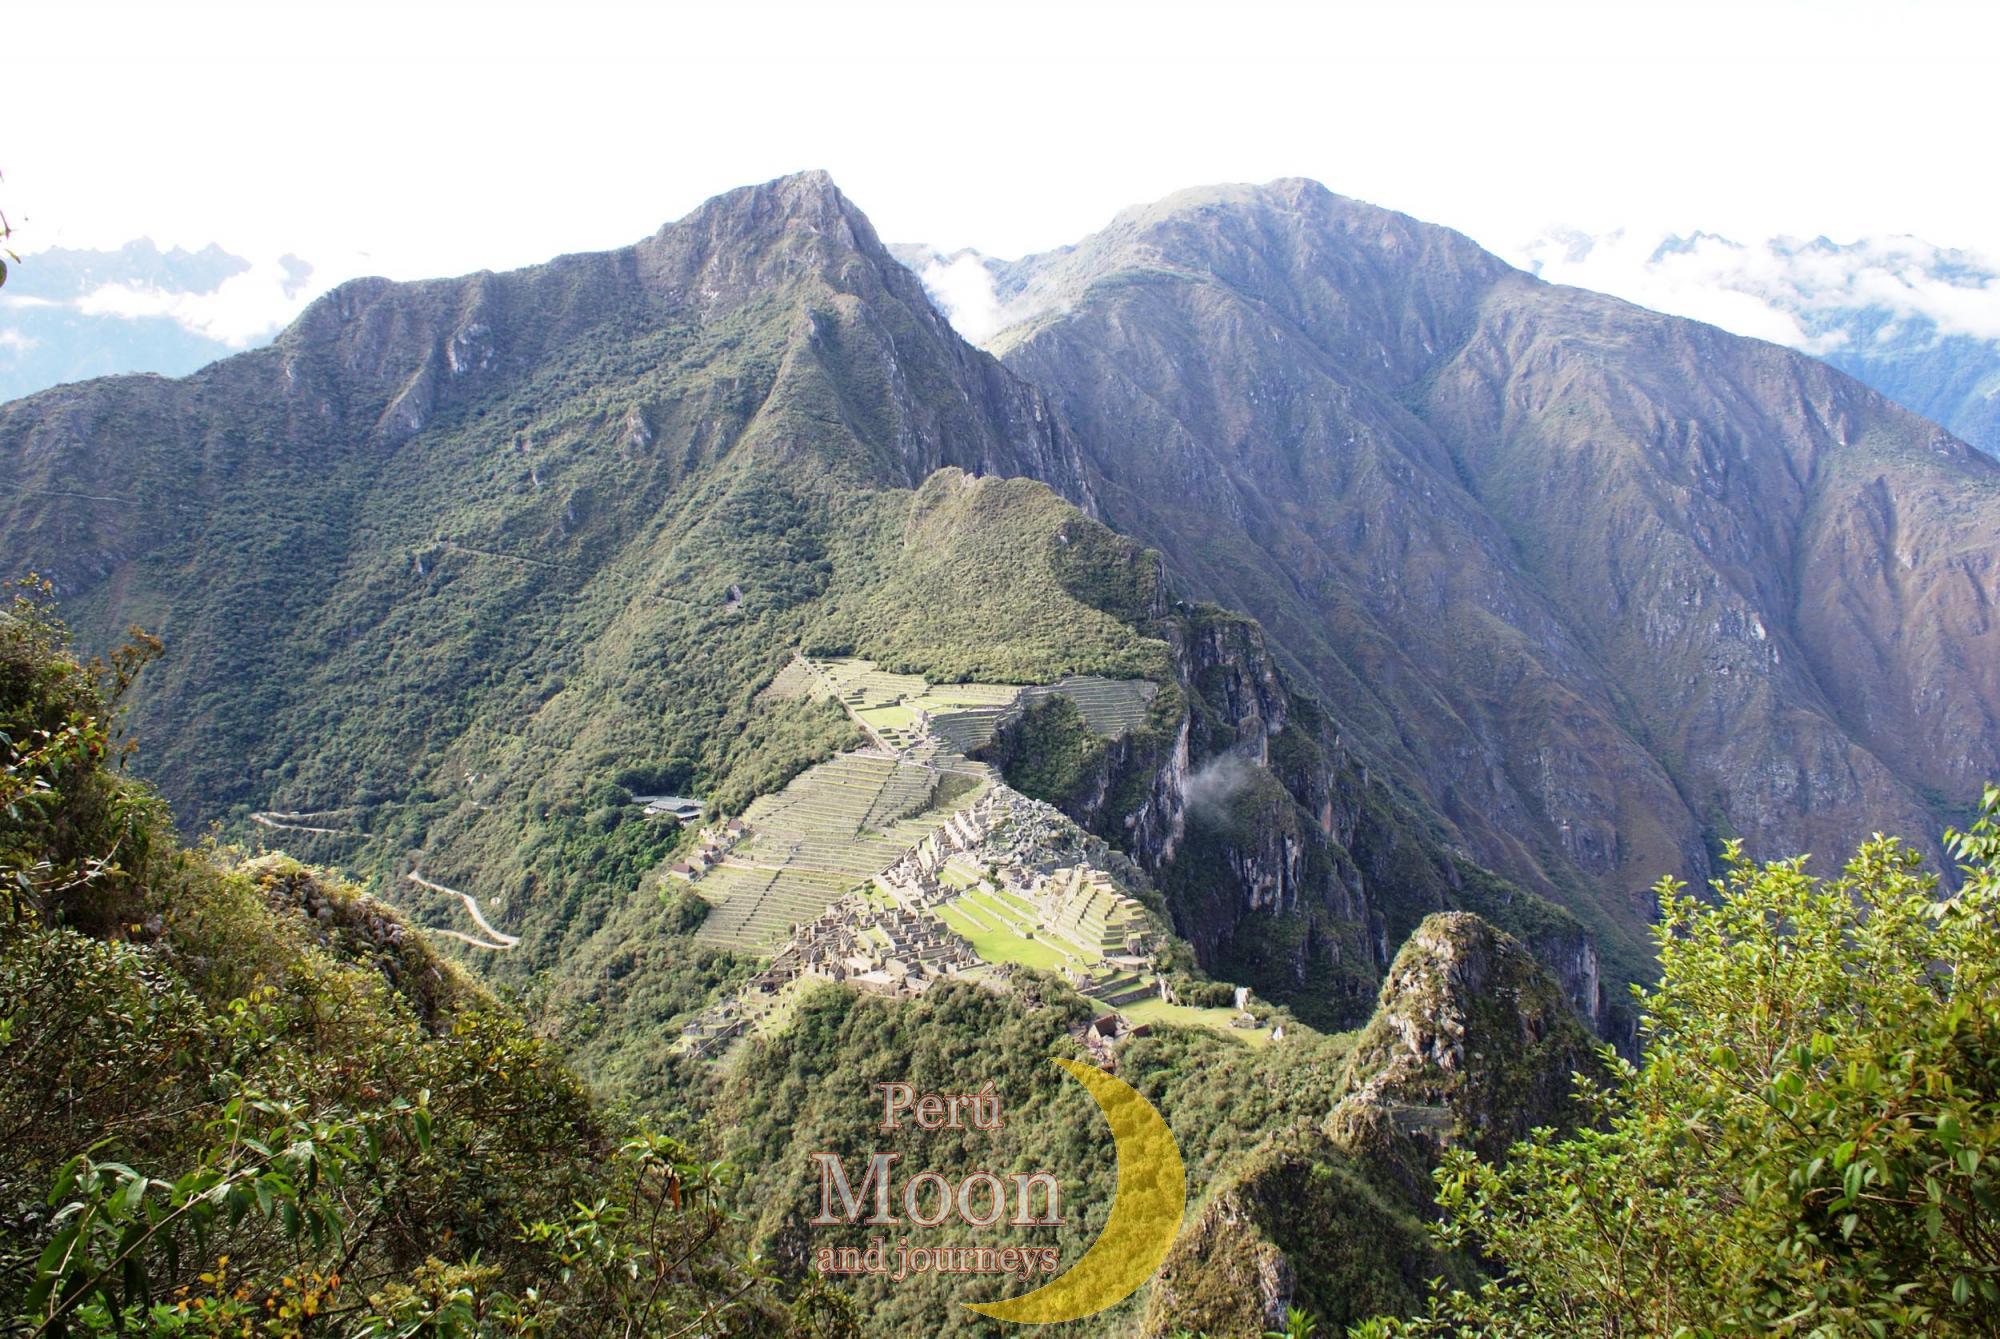 Traditional view of Machu Picchu from the Wayna Picchu